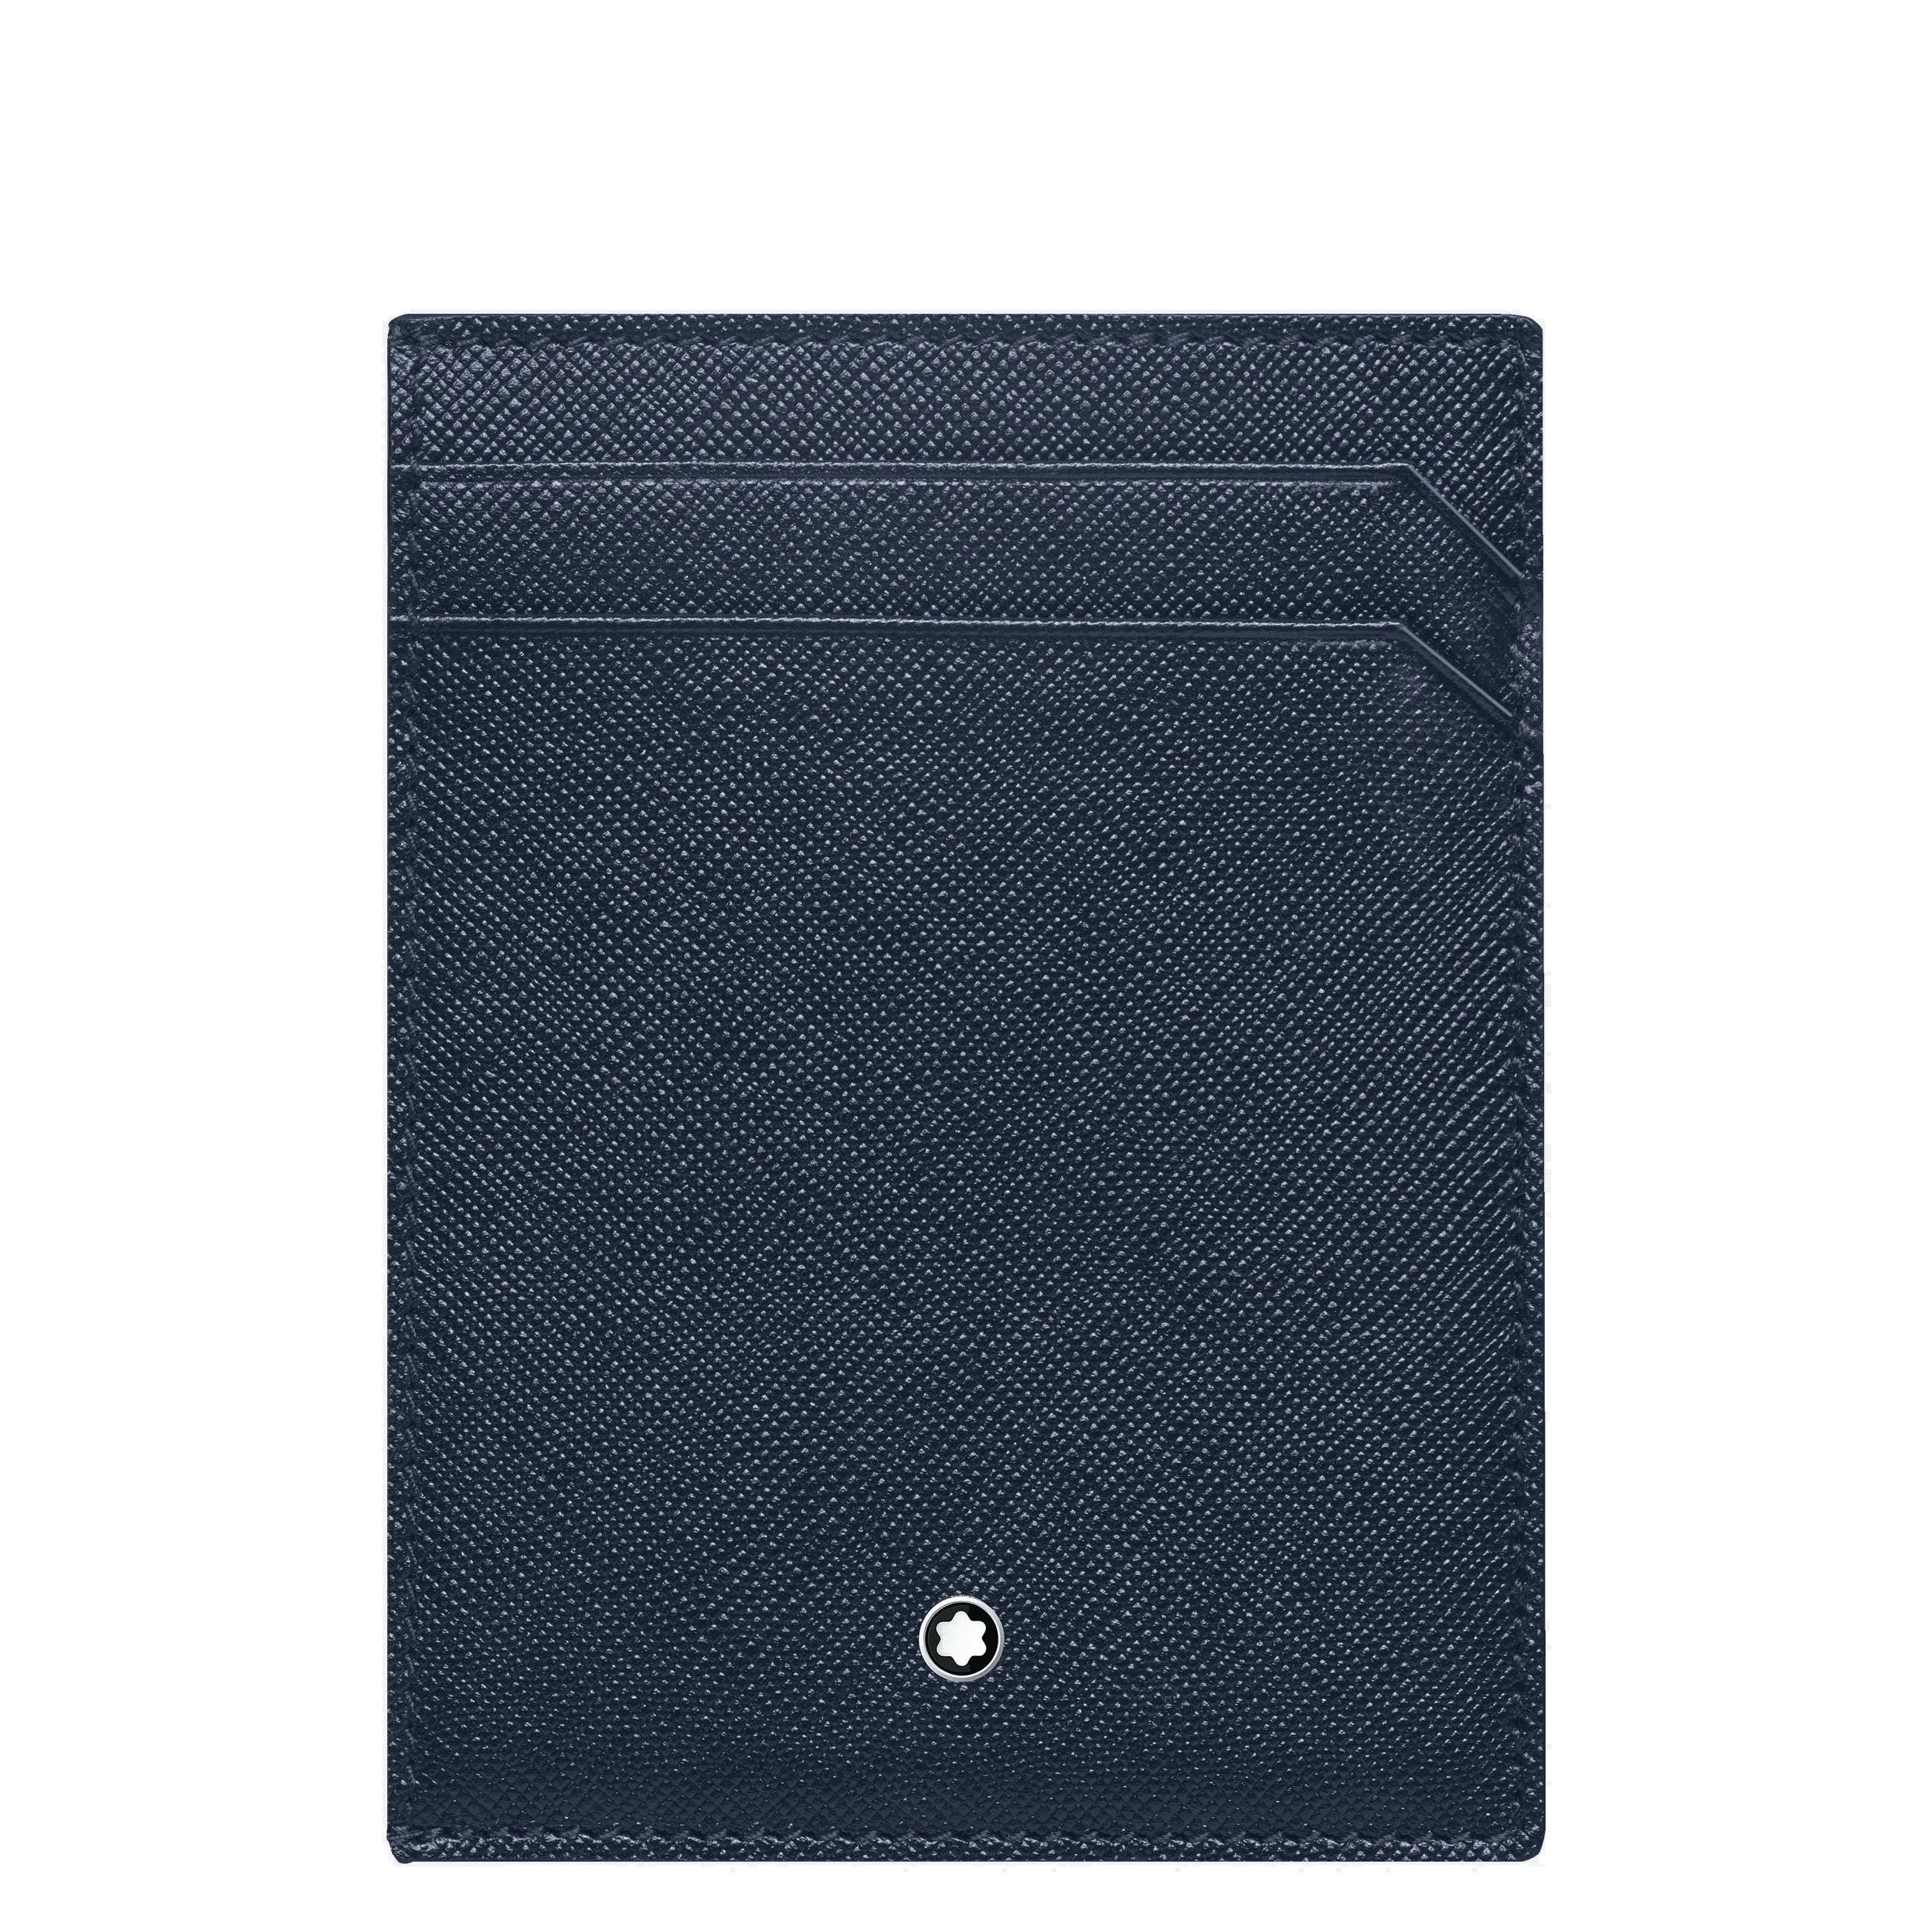 Montblanc 4 compartment pocket credit card holder with Montblanc Sartorial blue 128594